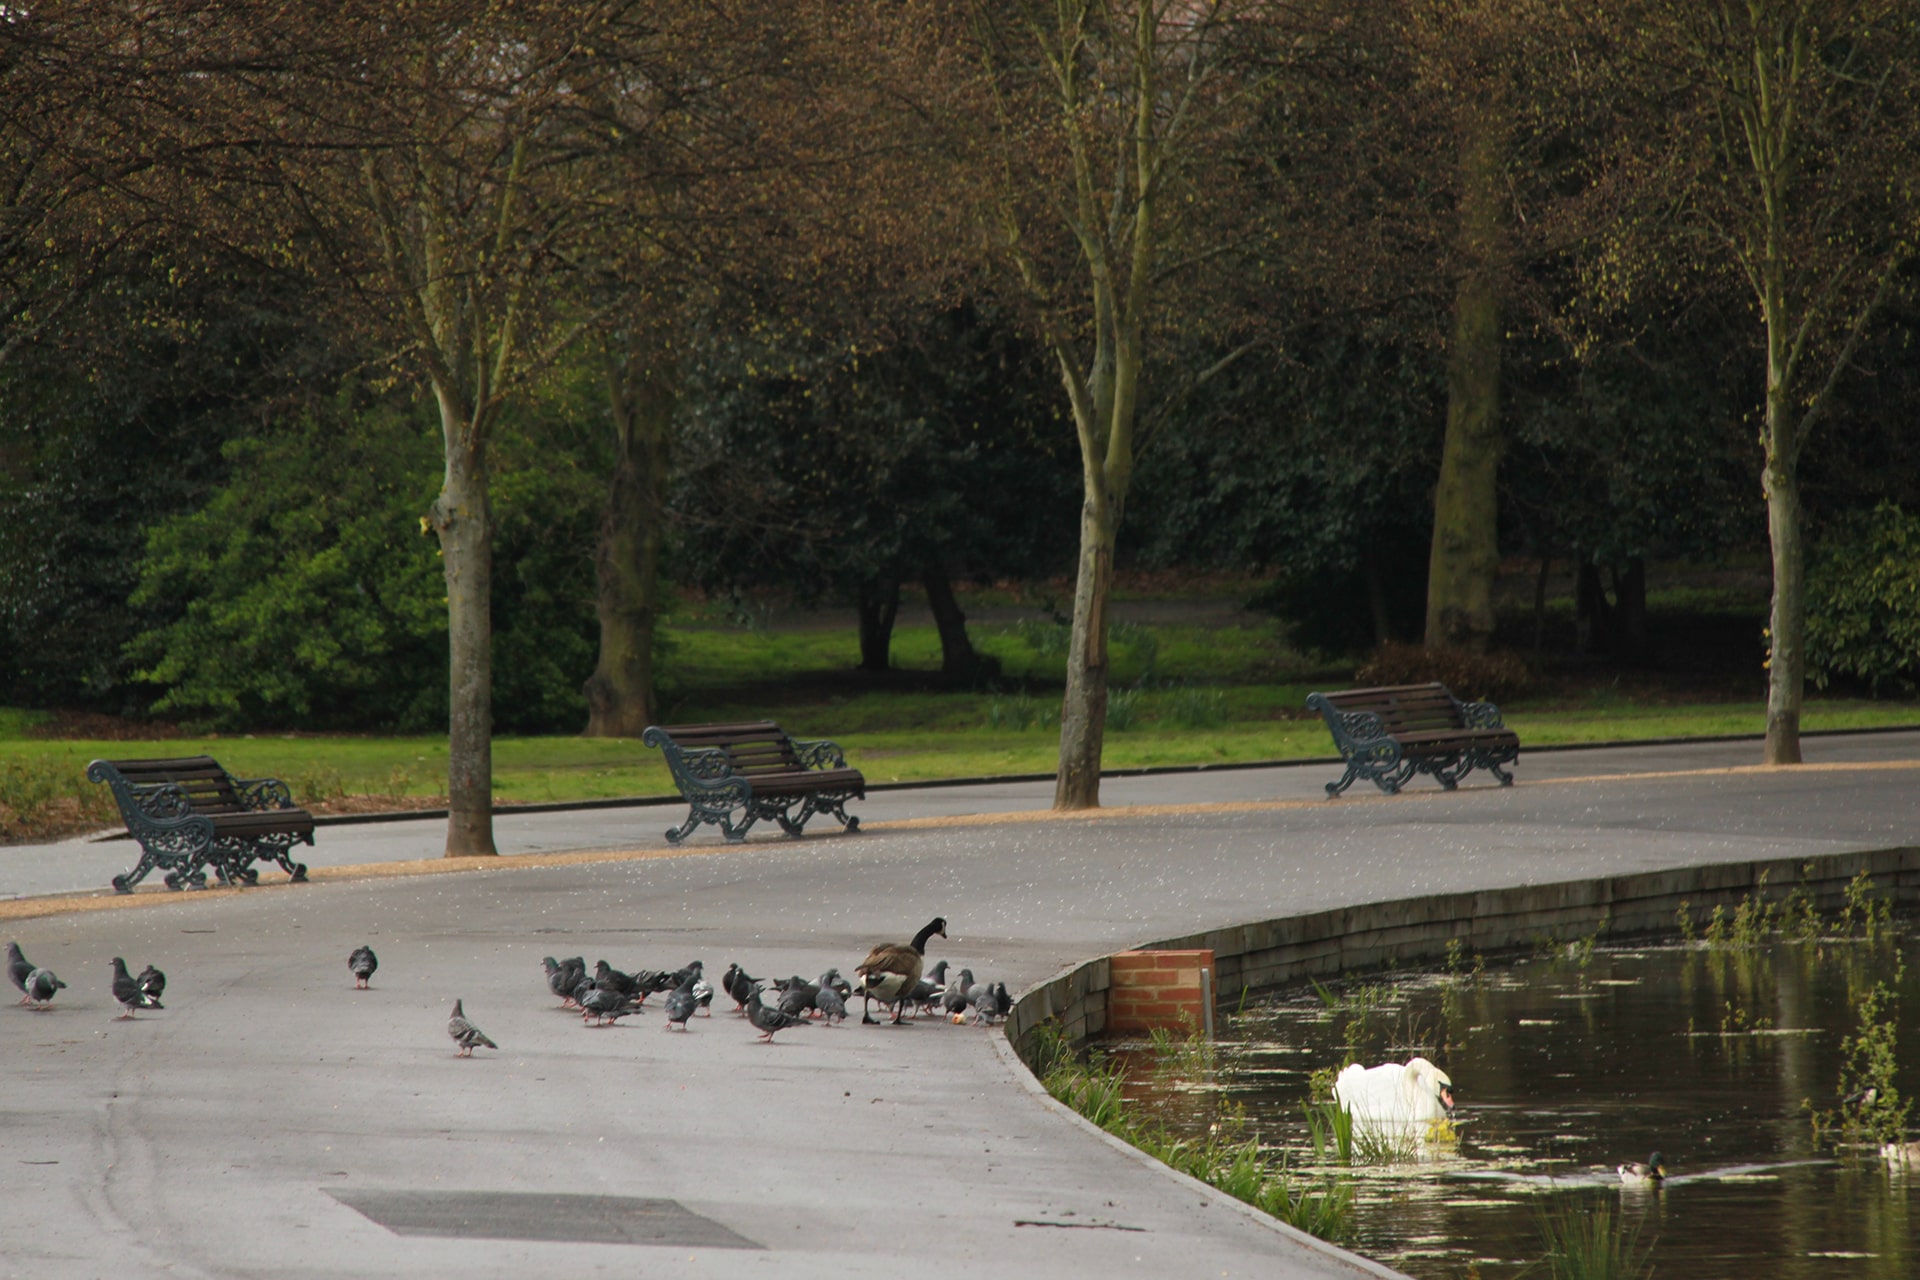 London park with ducks by a lakeside